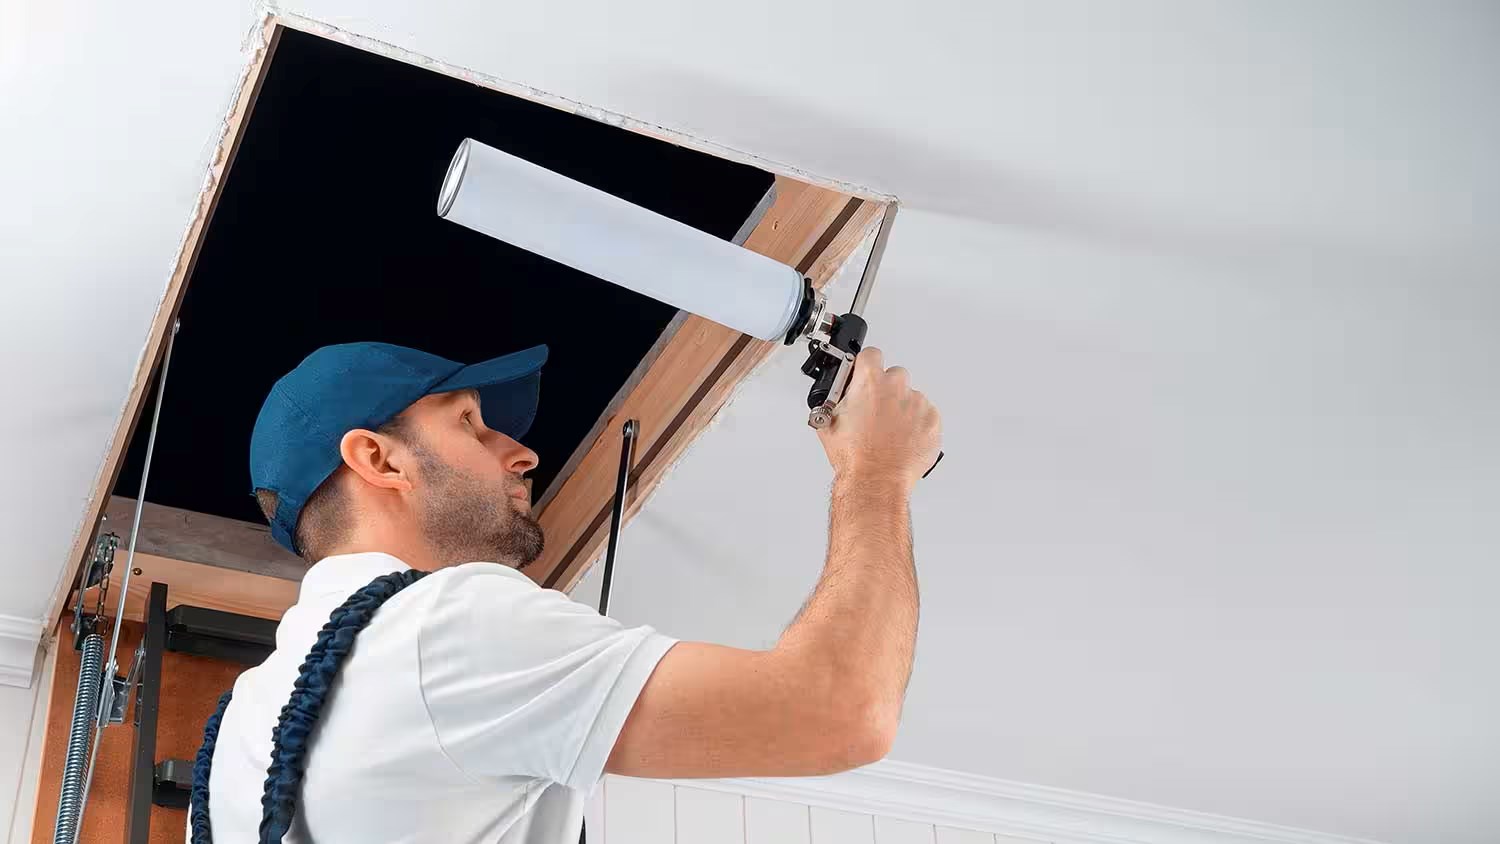 How To Install An Attic Ladder